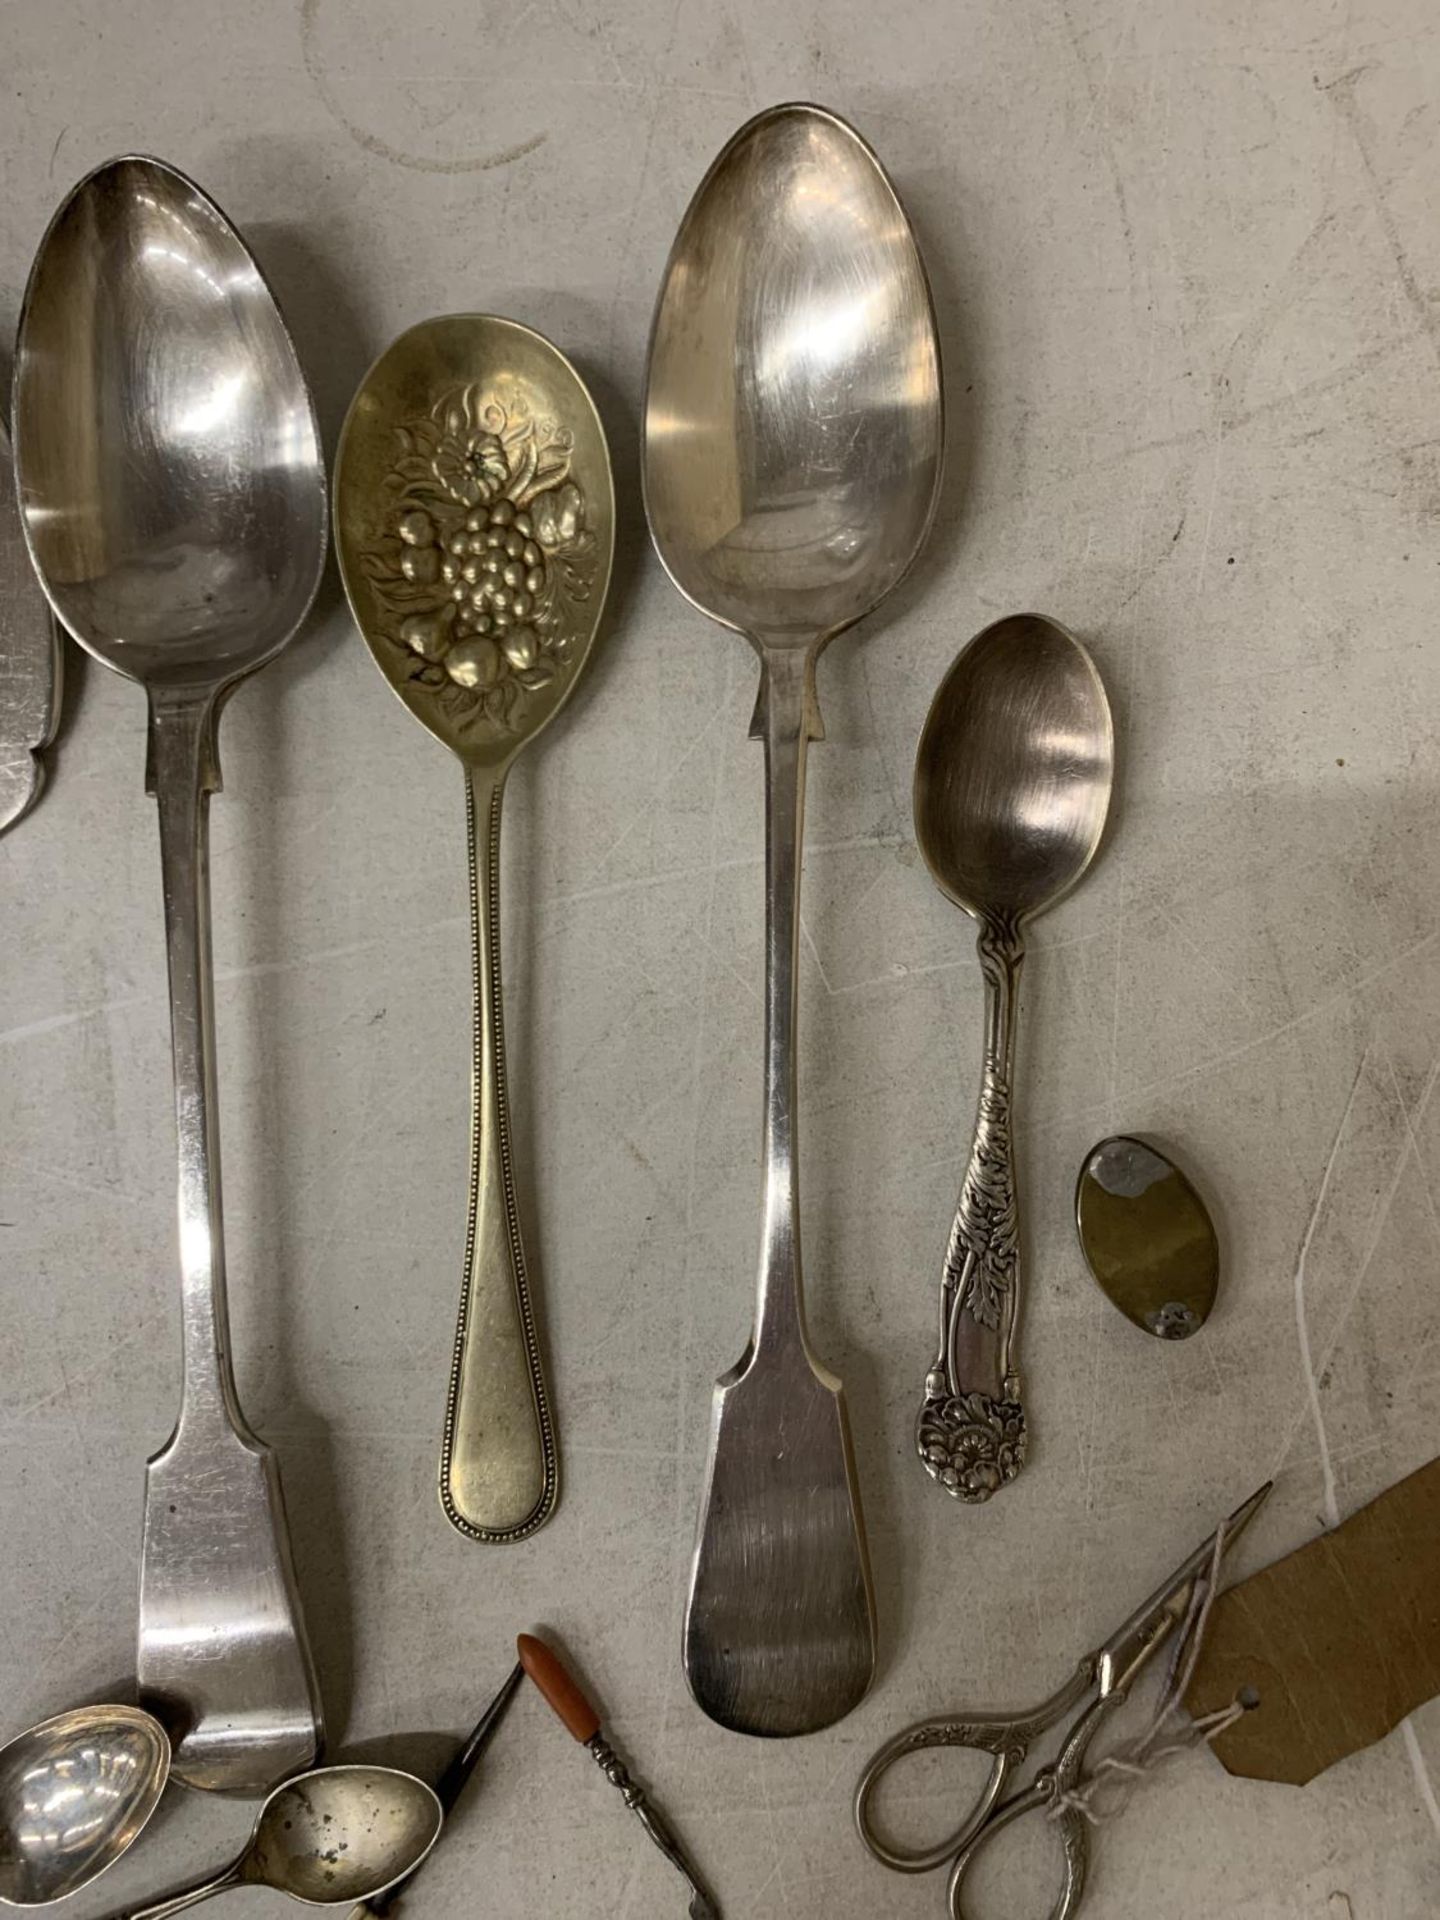 A QUANTITY OF VINTAGE FLATWARE TO INCLUDE A LARGE BERRY SPOON, SERVING SPOONS, MUFFIN FORK, SCISSORS - Image 2 of 4